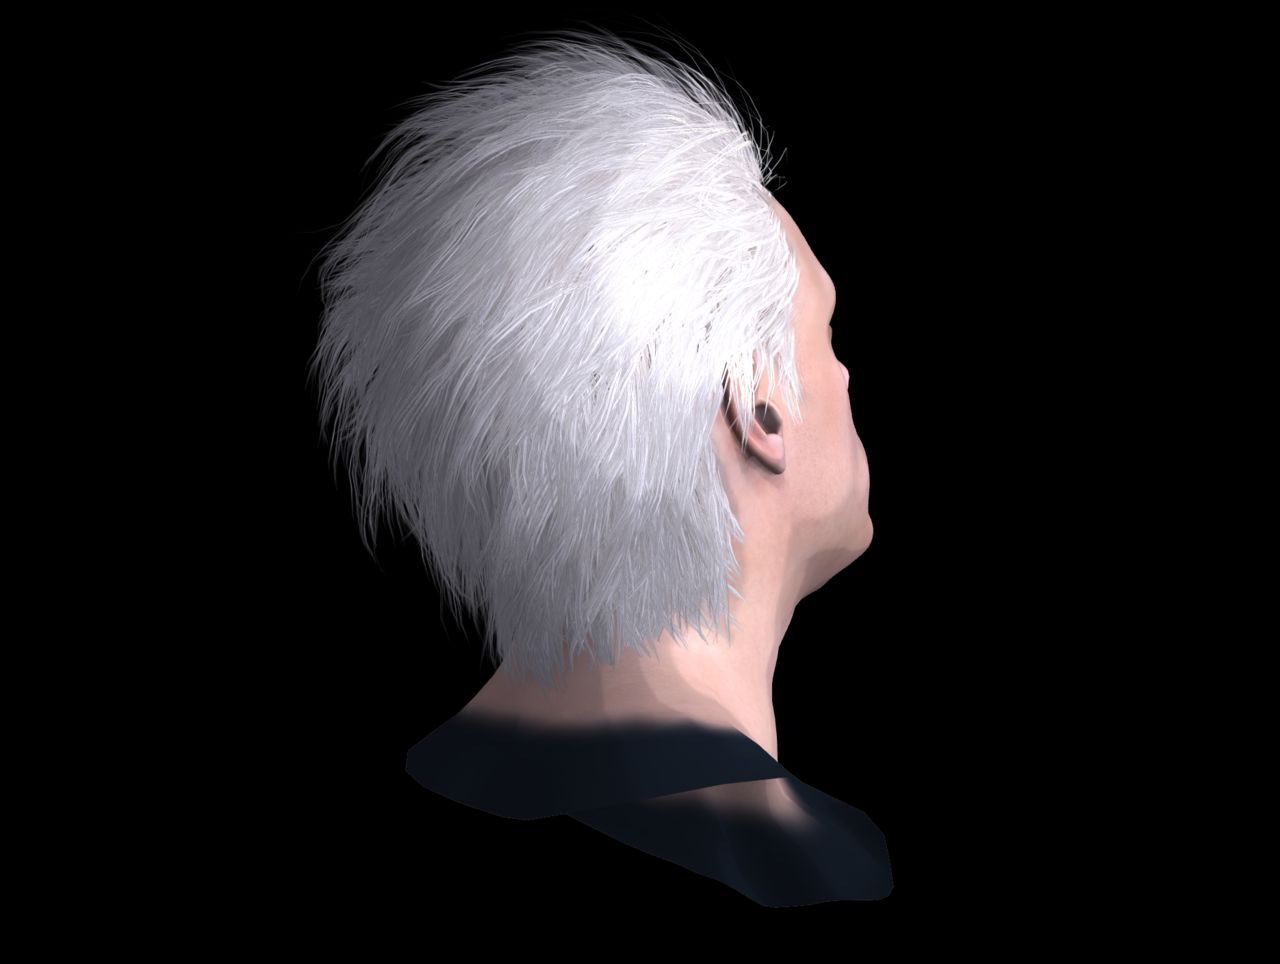 [J.A.] DMC5 | Vergil Head Reference PNG 32